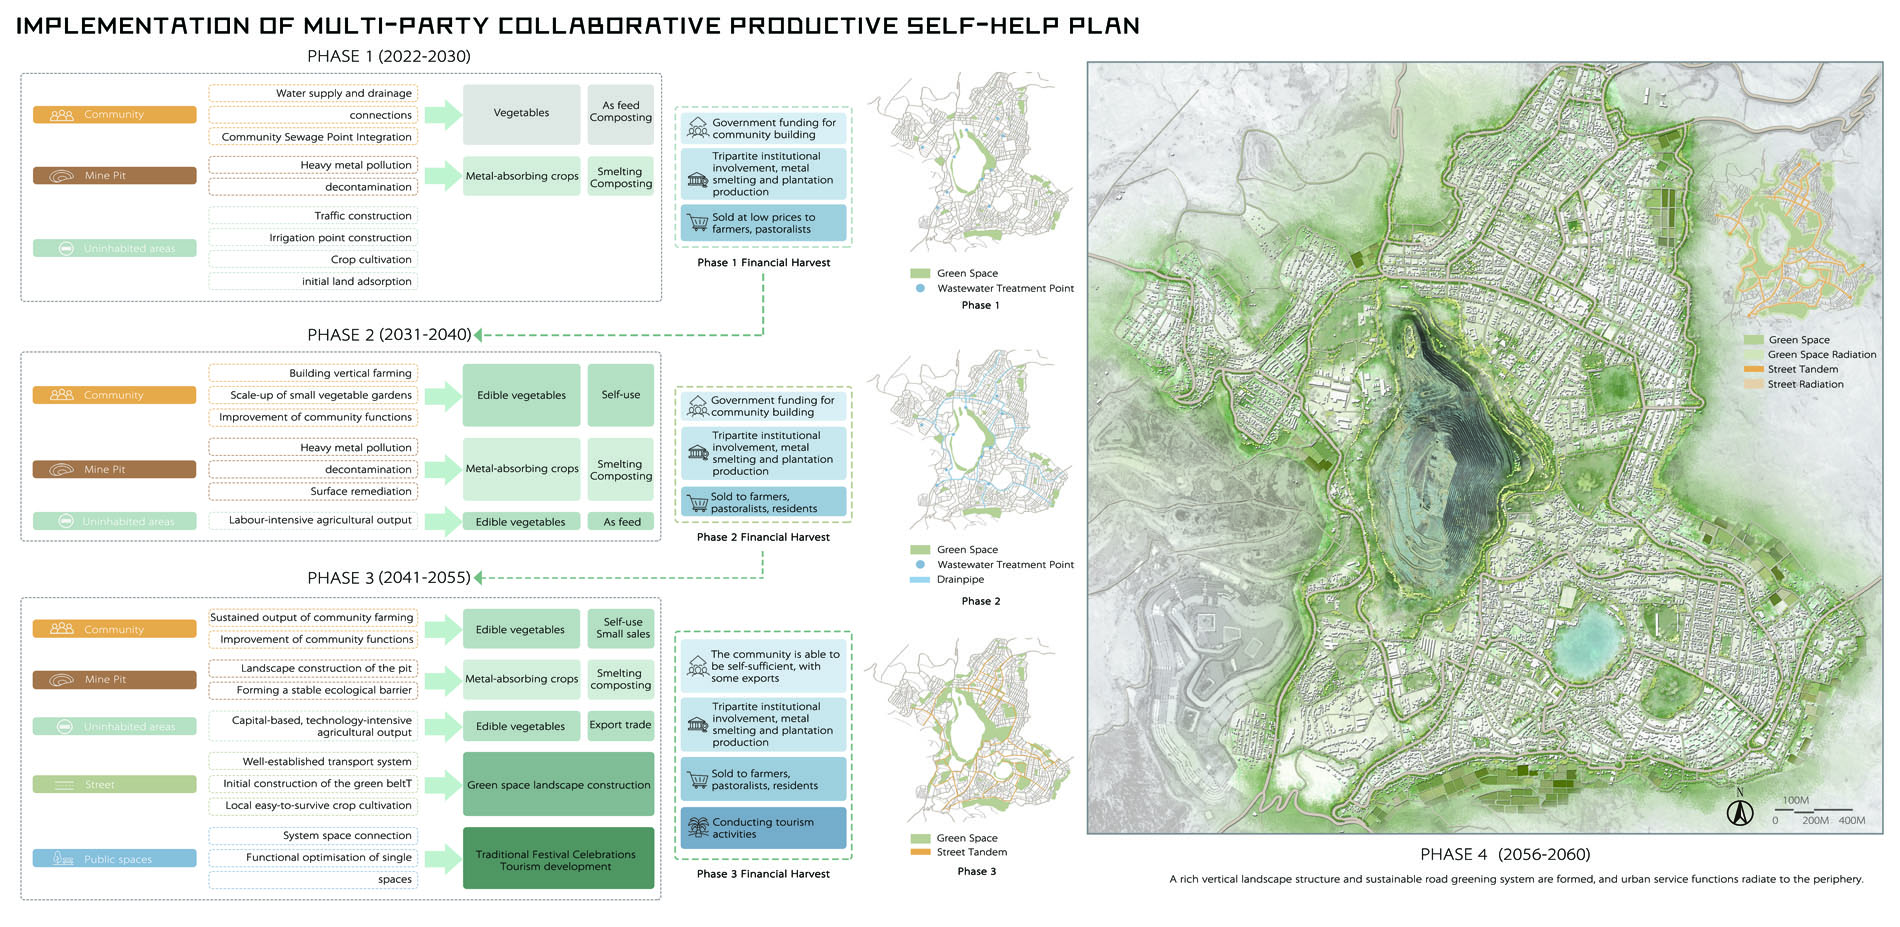 Implementation of multi-party collaborative productive self-help plan